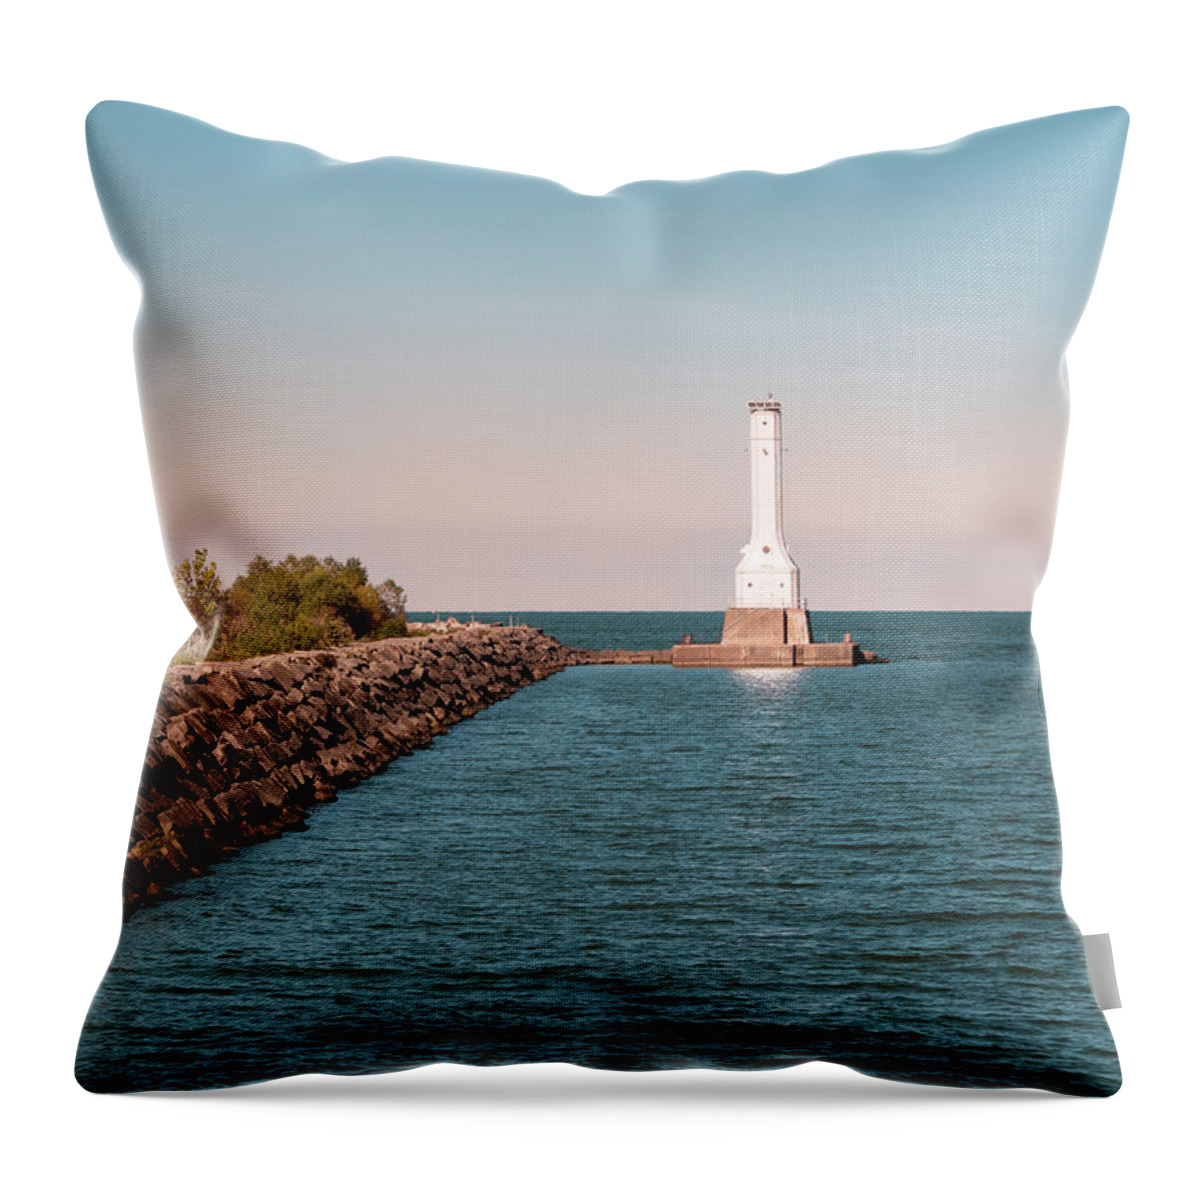 Huron Harbor Lighthouse Throw Pillow featuring the photograph Huron Harbor Lighthouse Blue Hour by Marianne Campolongo